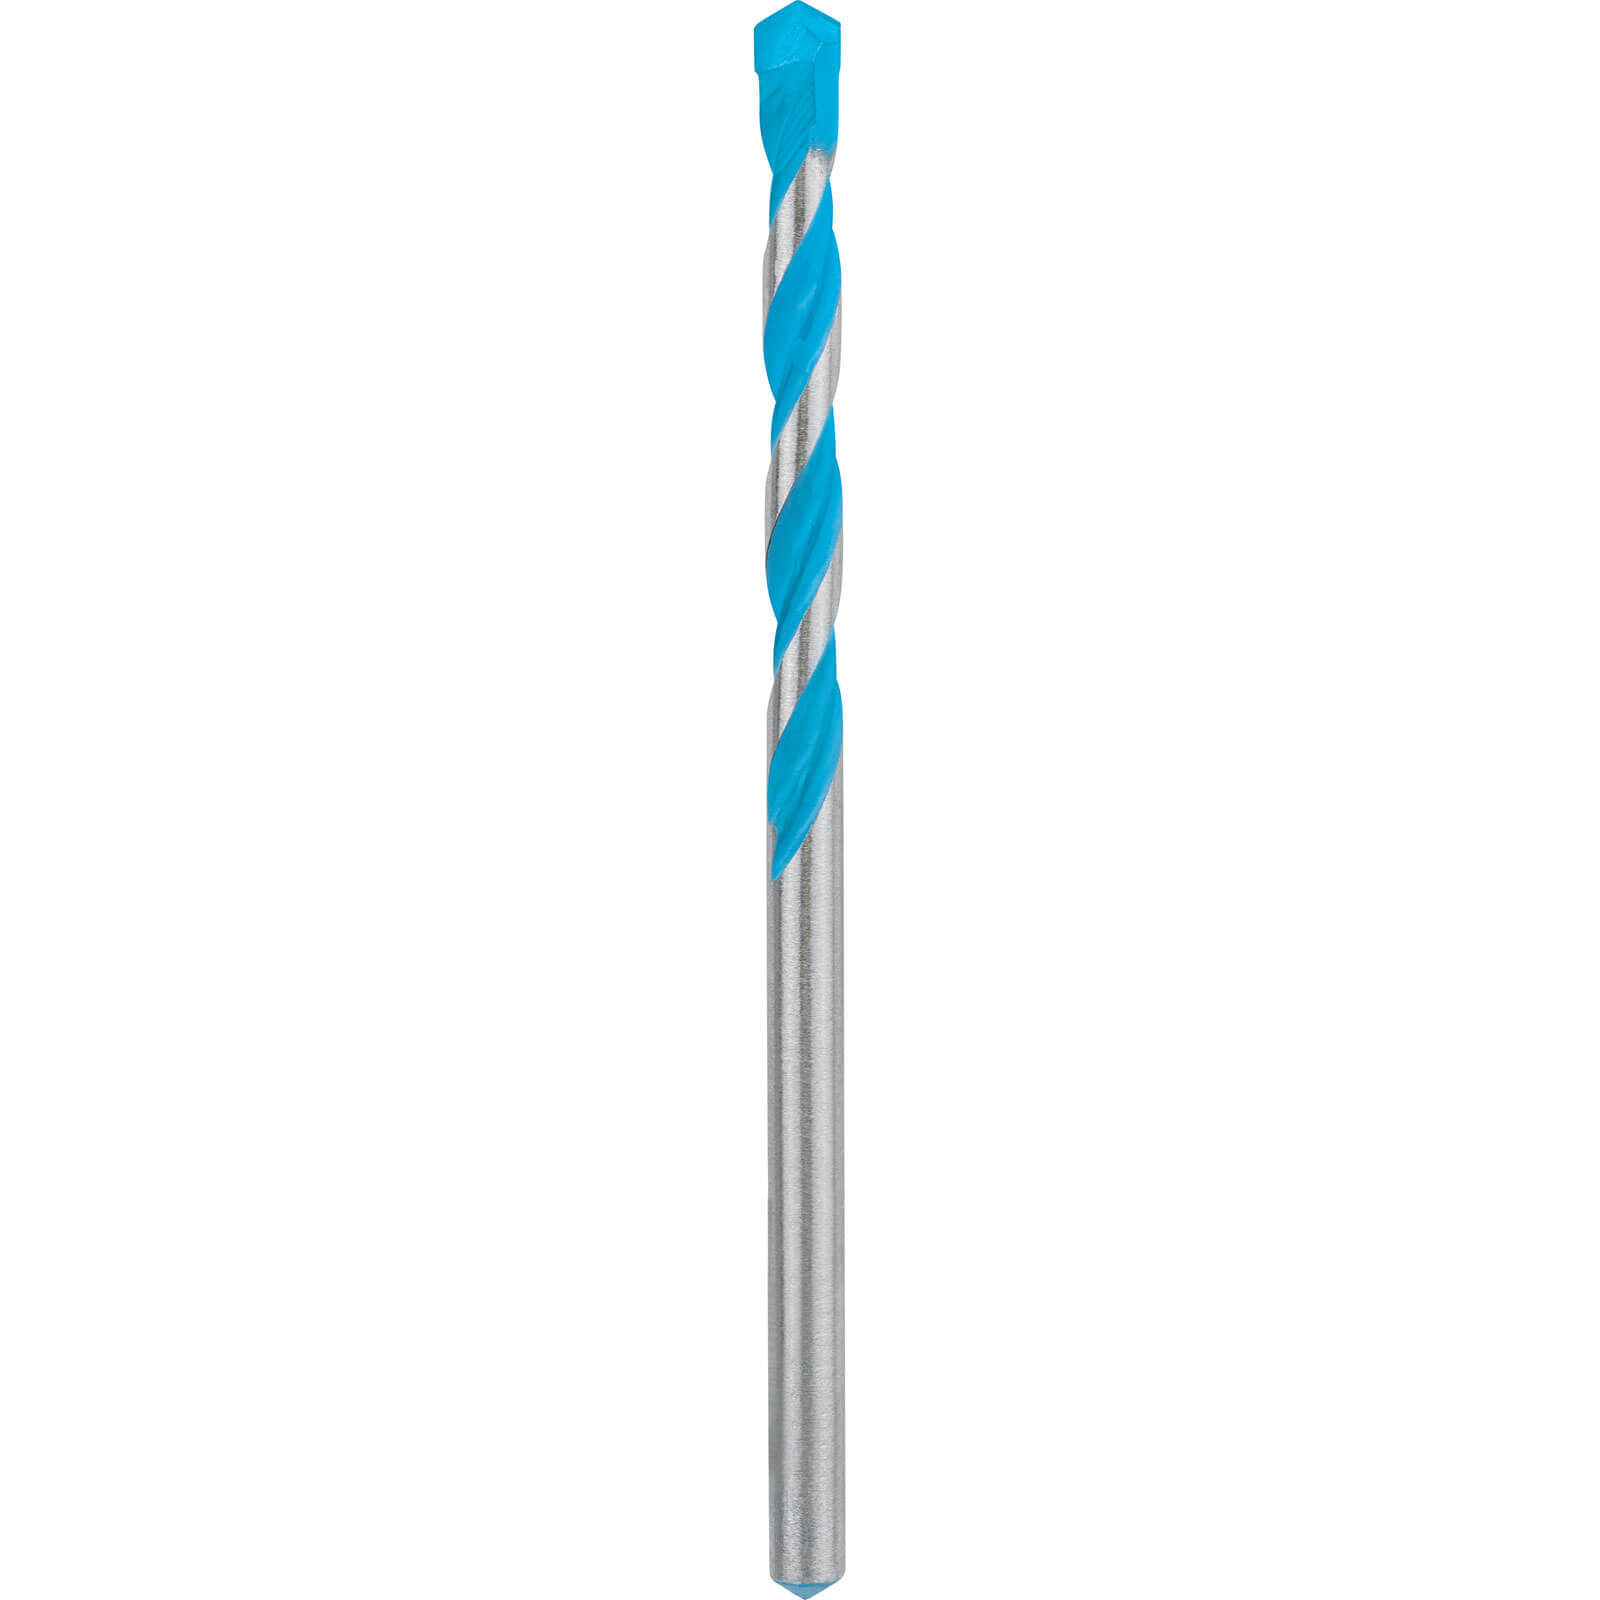 Image of Bosch Expert CYL-9 Multi Construction Drill Bit 4mm 75mm Pack of 1